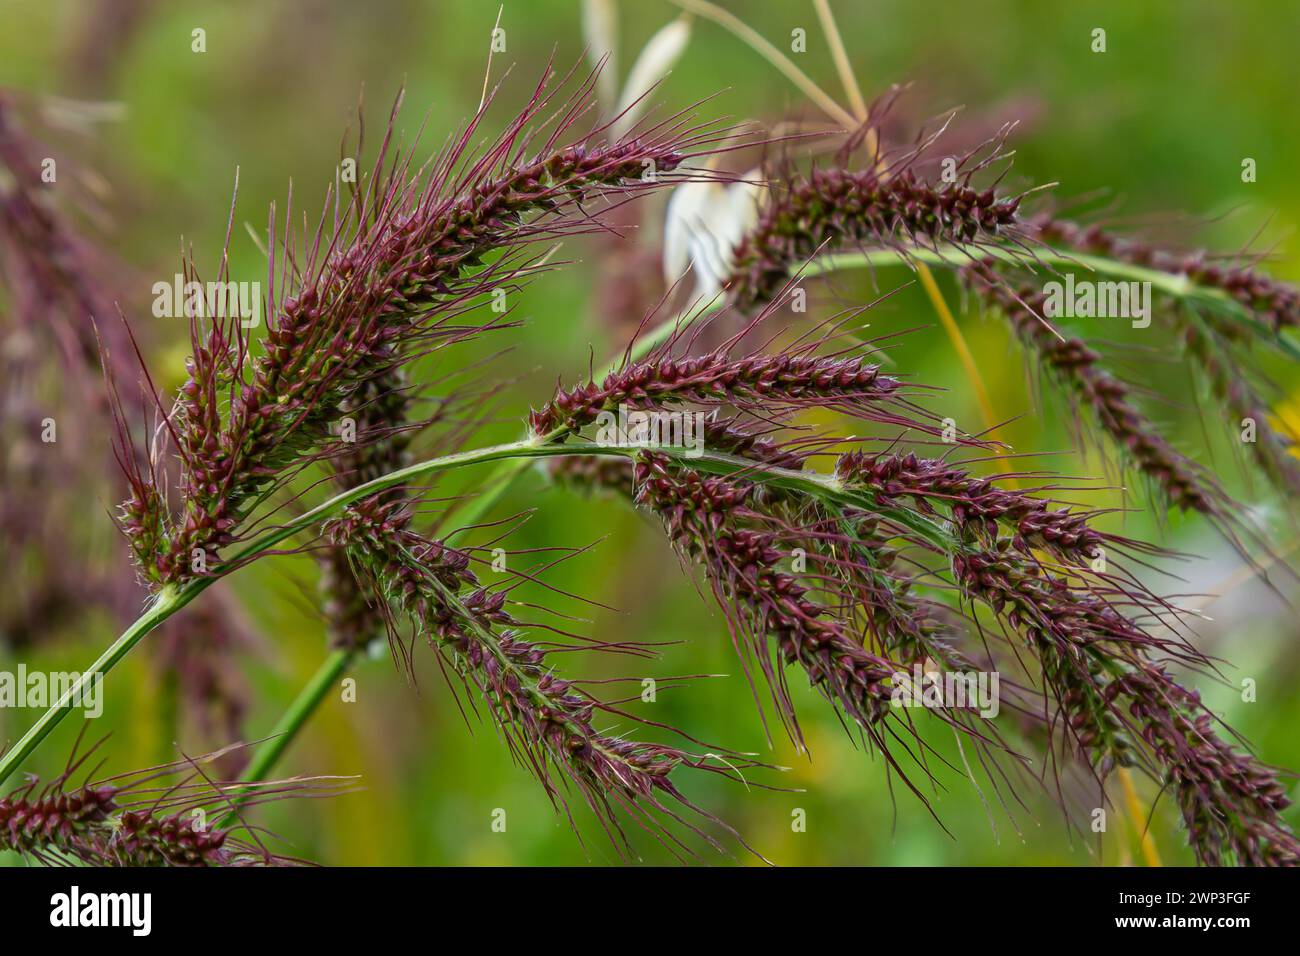 In the field, as weeds among the agricultural crops grow Echinochloa crus-galli. Stock Photo